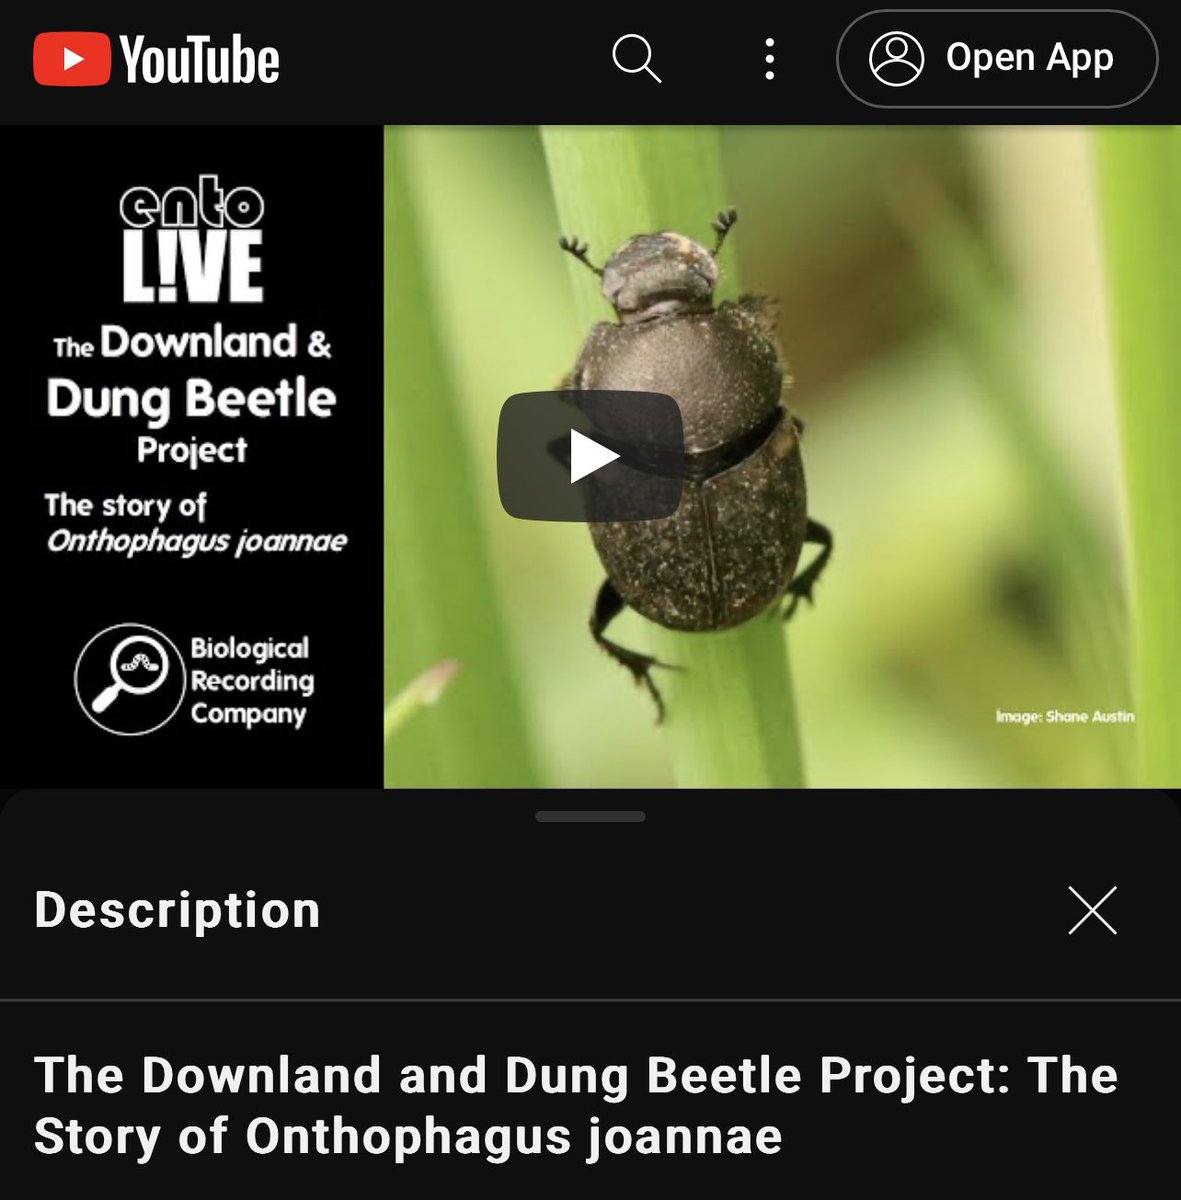 Great to join @KeironDBrown on #EntoLive a give a quick summary of over 2 decades of work that started as a dung beetle passion & became a landscape scale restoration project… 
youtube.com/watch?v=1xHYg2…